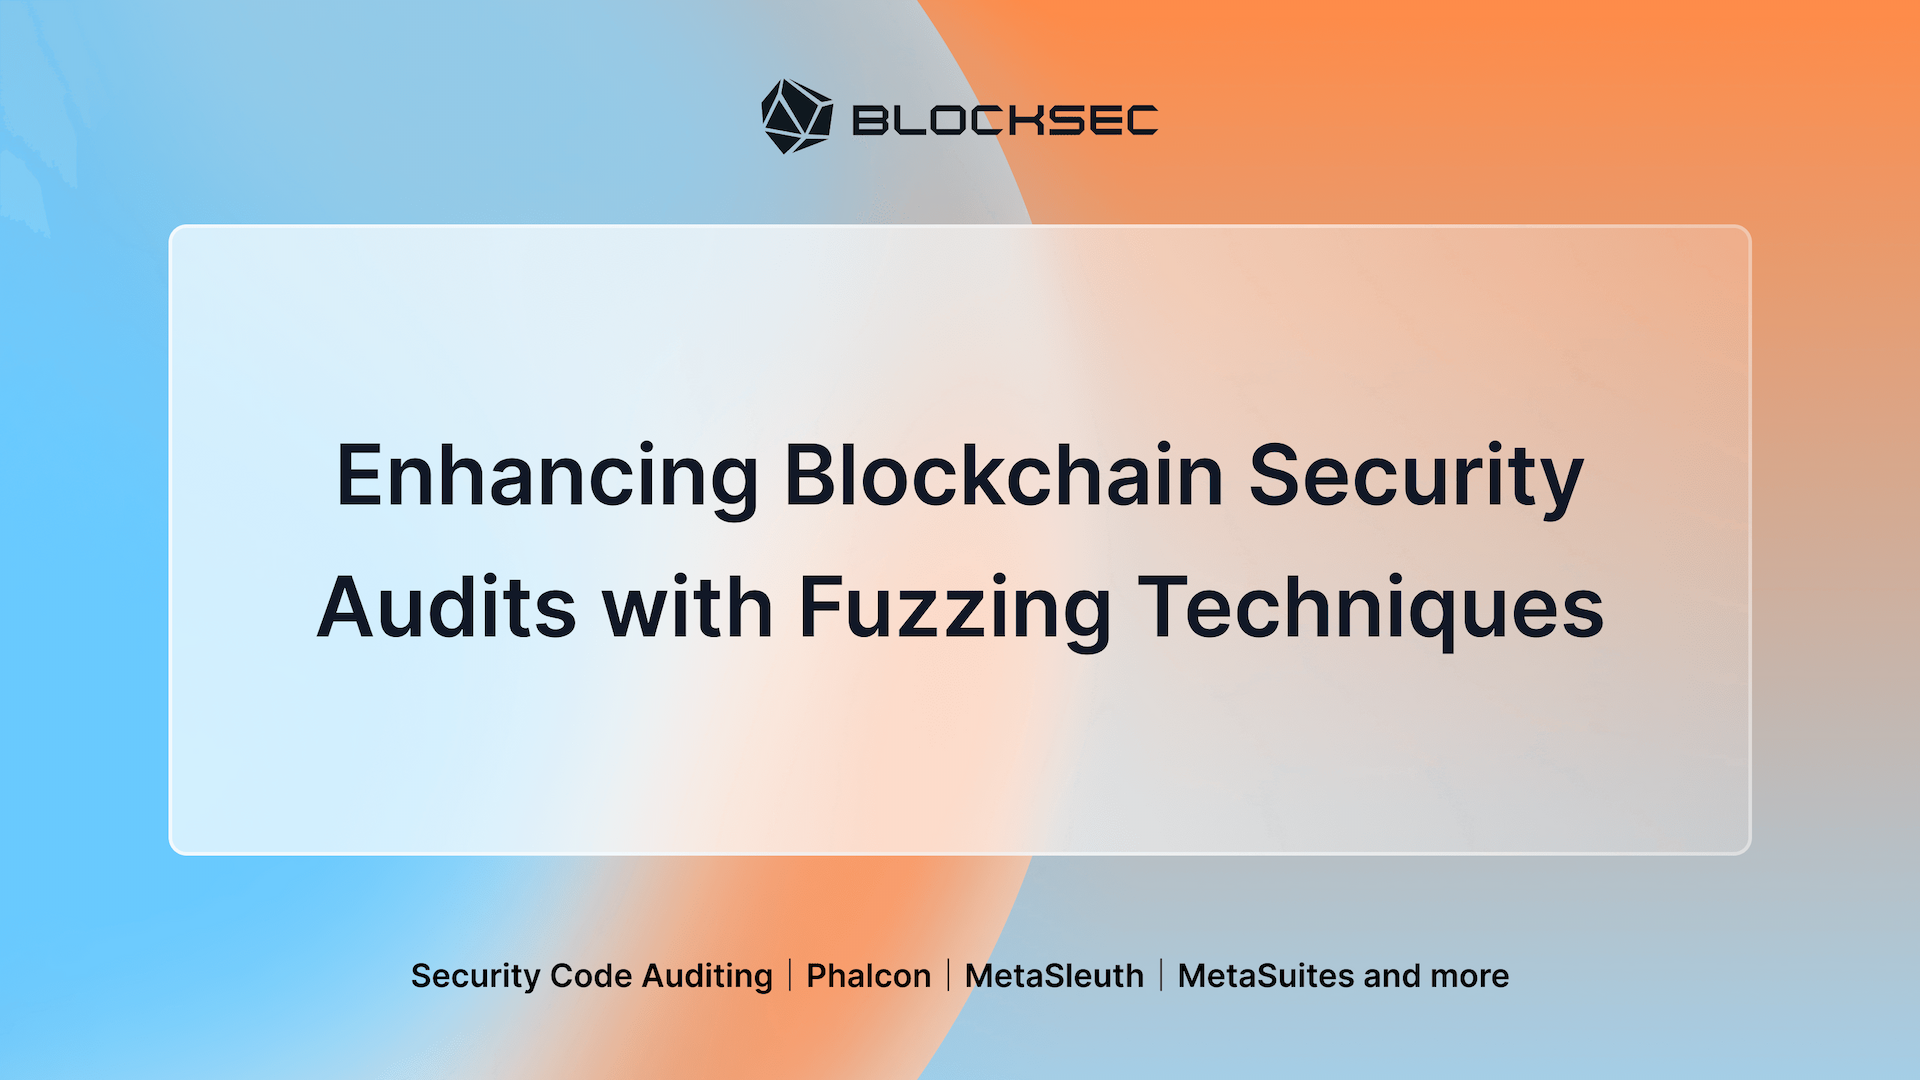 BlockSec: Enhancing Blockchain Security Audits with Fuzzing Techniques